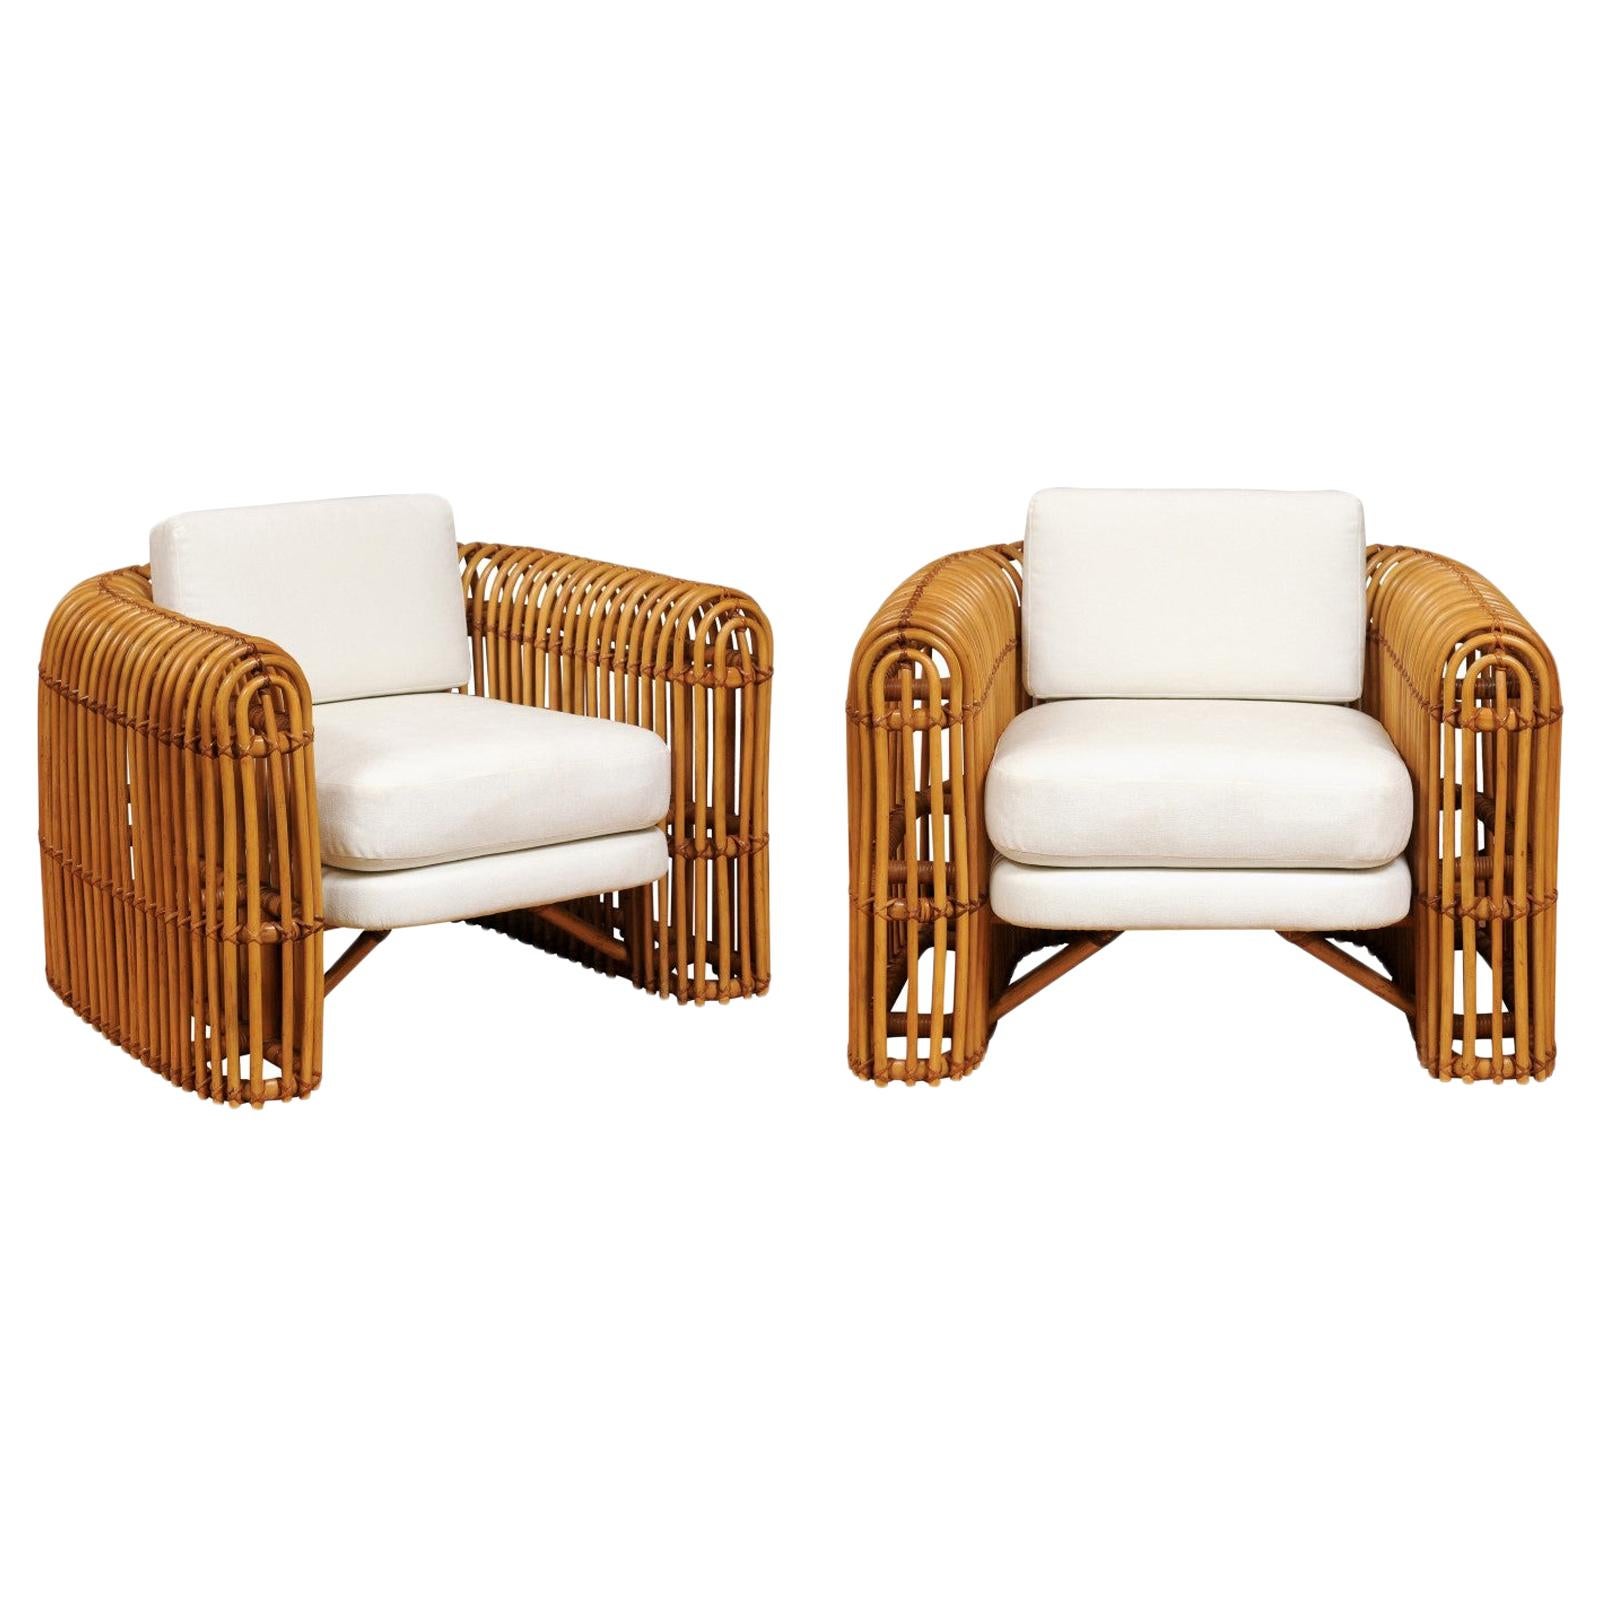 Henry Olko Lounge Chairs